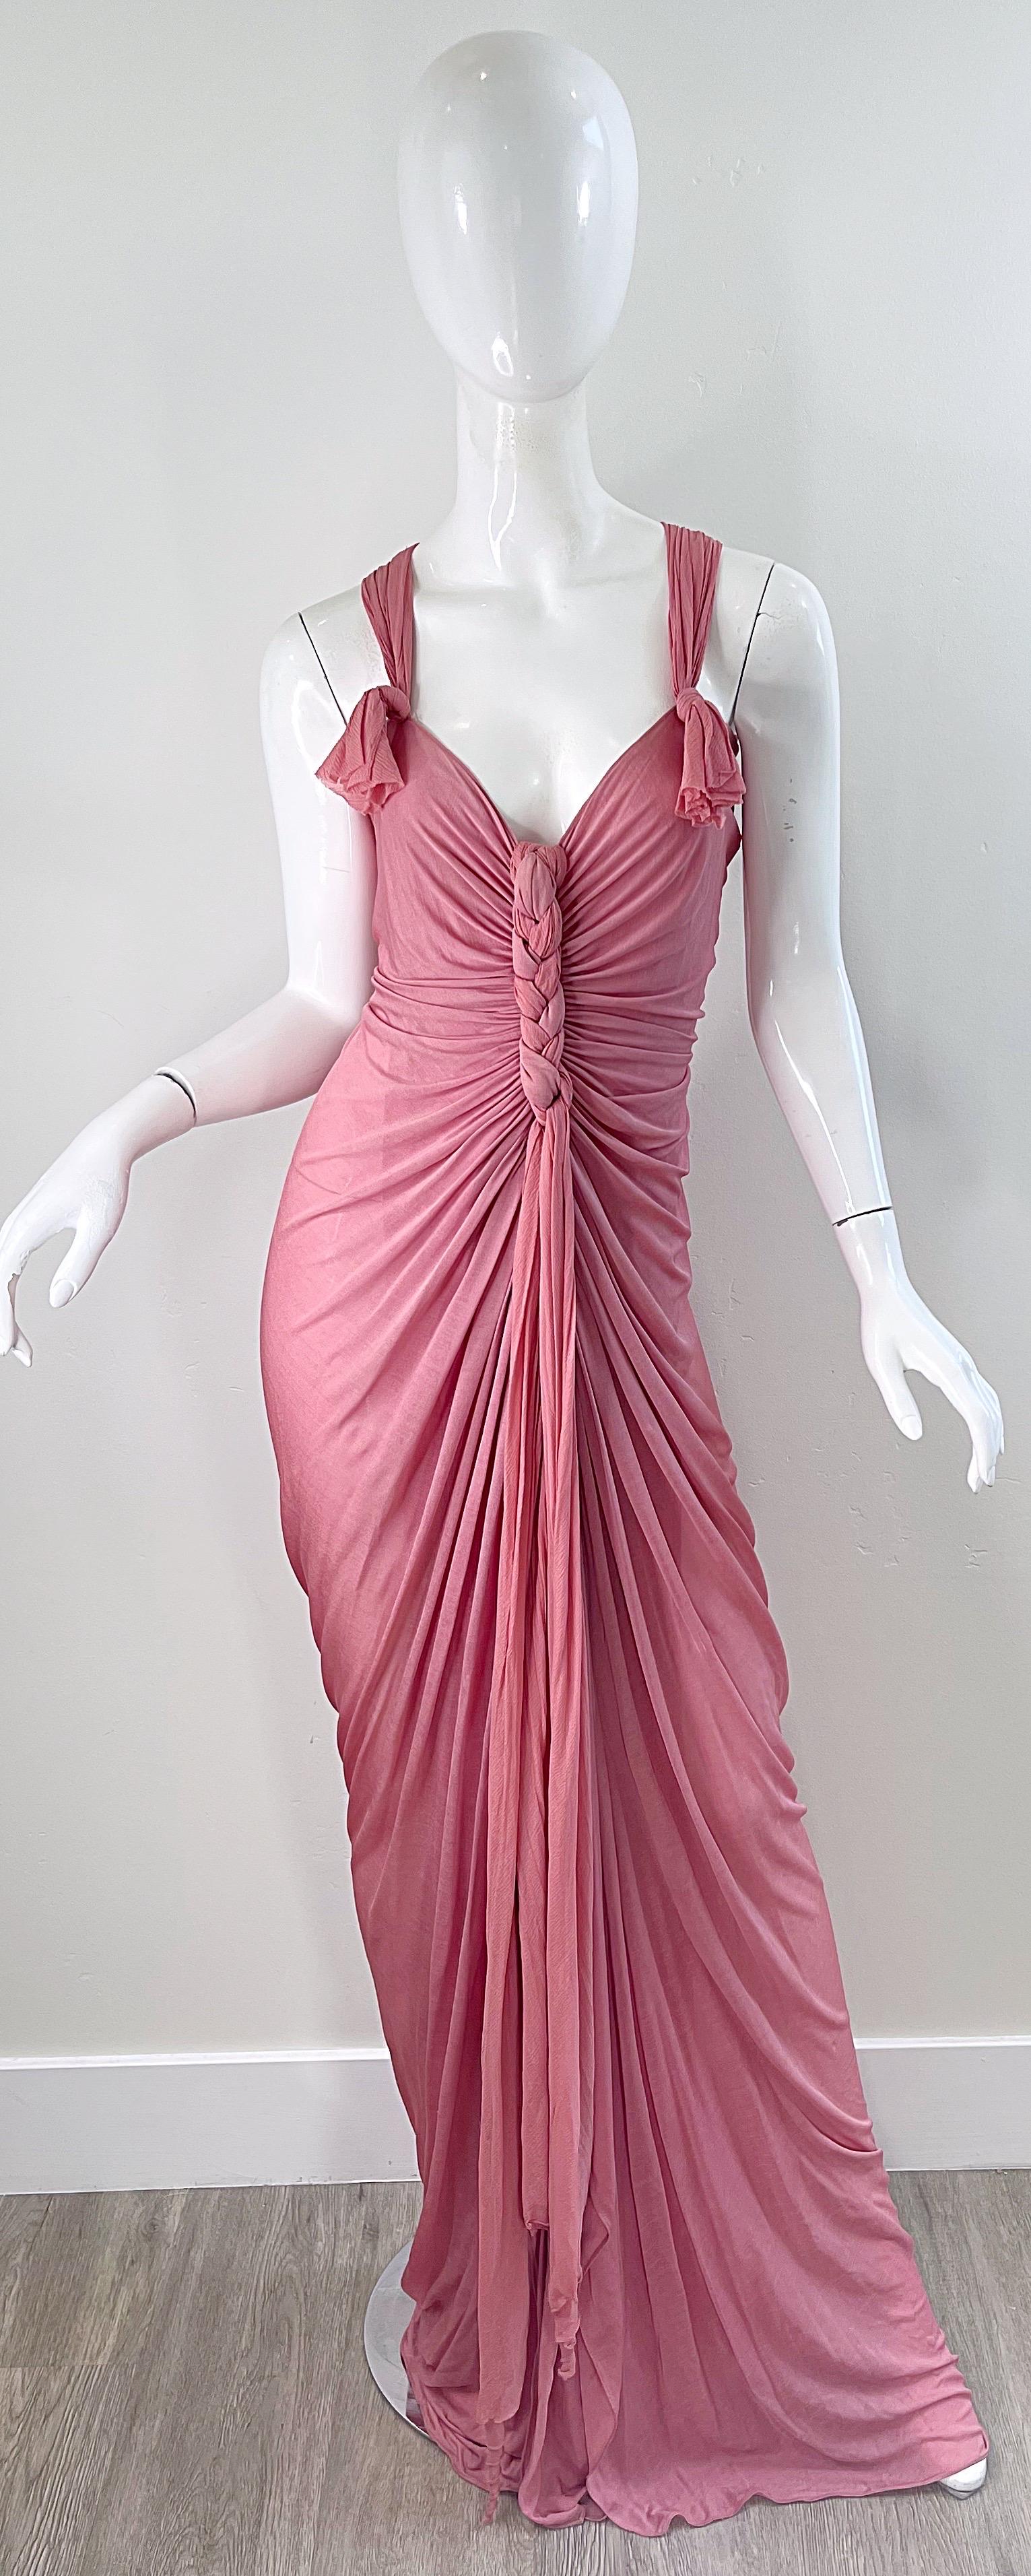 NWT Donna Karan Fall 2005 Pink Dusty Rose Mauve 30s Style Semi Sheer Gown Dress In New Condition For Sale In San Diego, CA